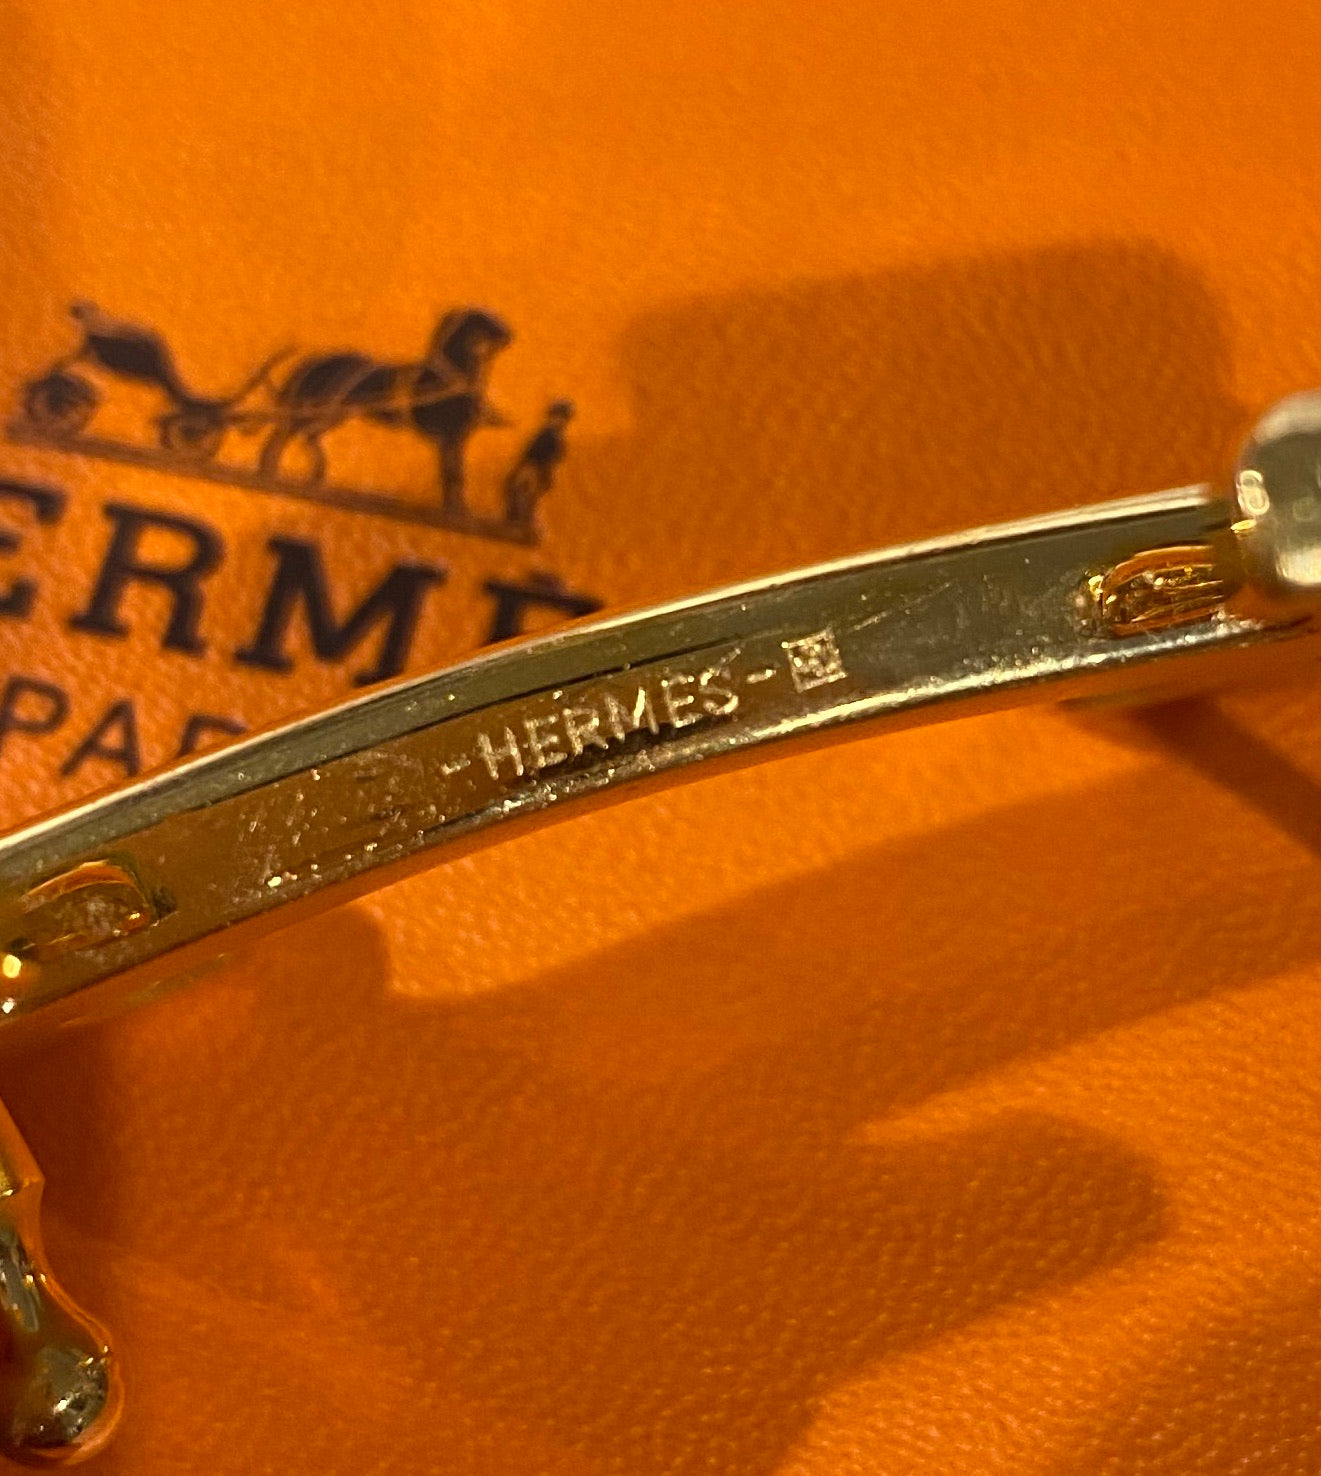 Hermès Gold H Belt Kit Electric Blue & Navy – Dina C's Fab and Funky  Consignment Boutique